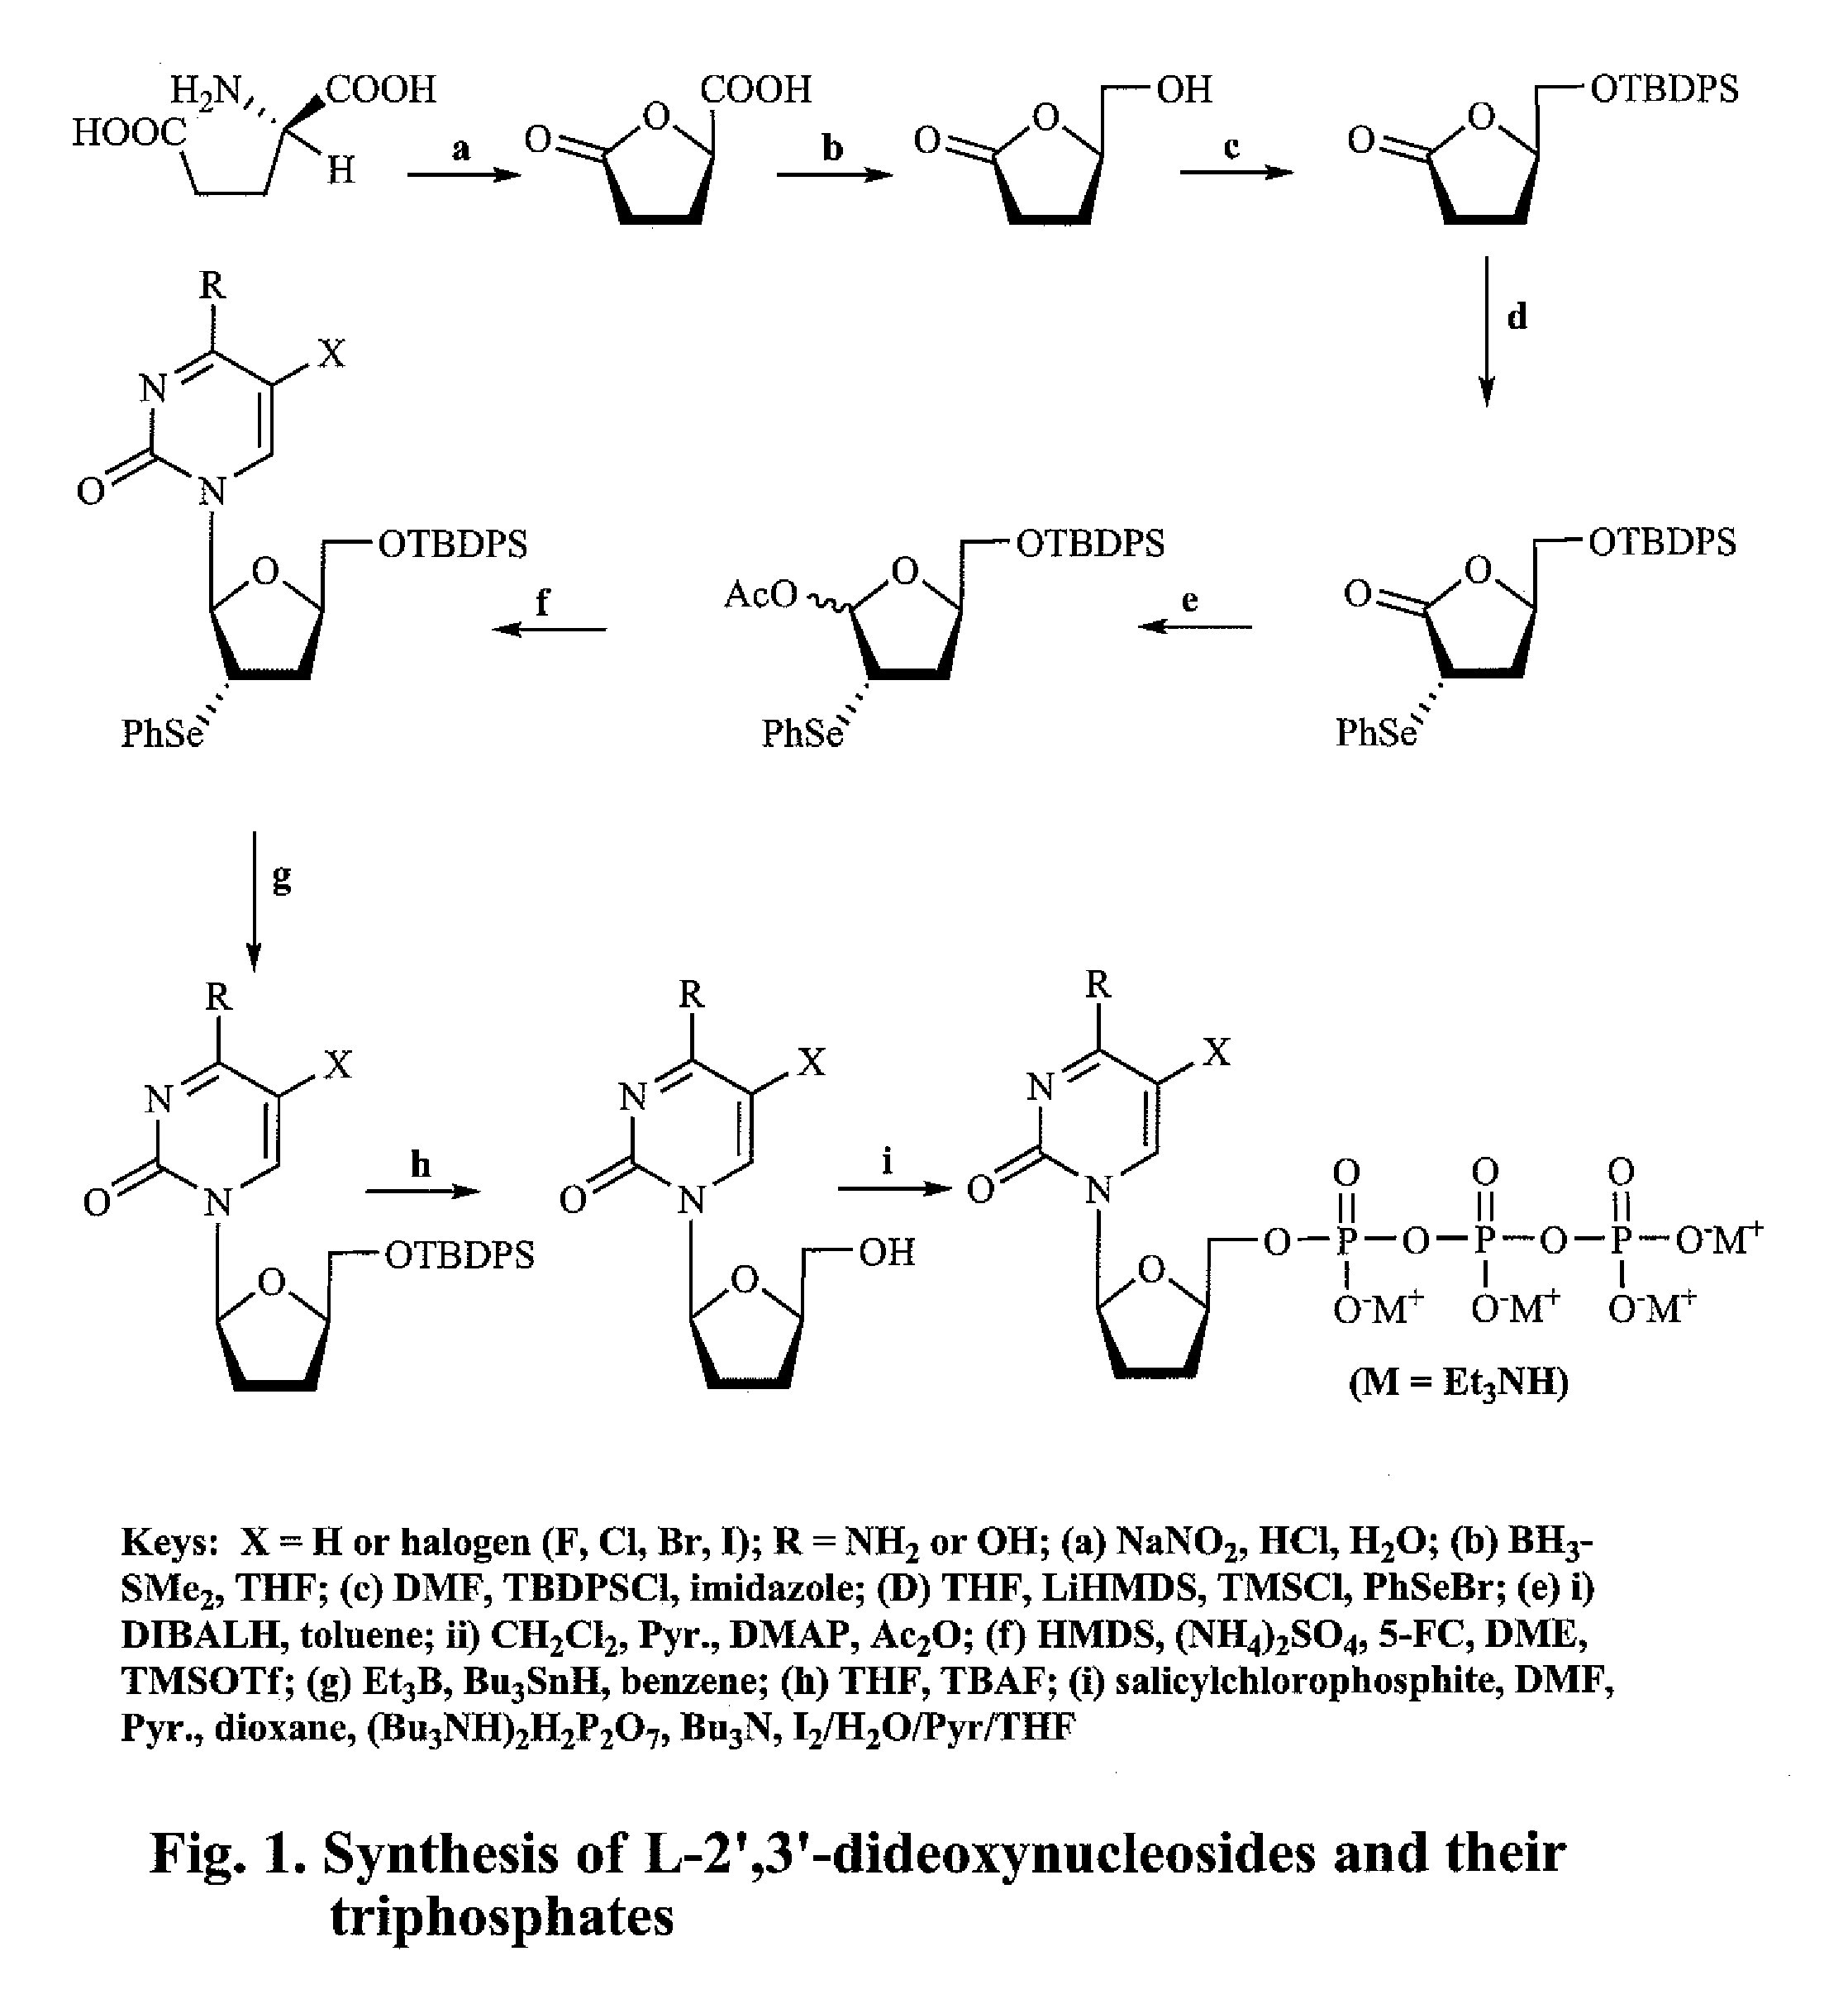 2′,3′-dideoxynucleoside analogues for the treatment or prevention of Flaviviridae infections